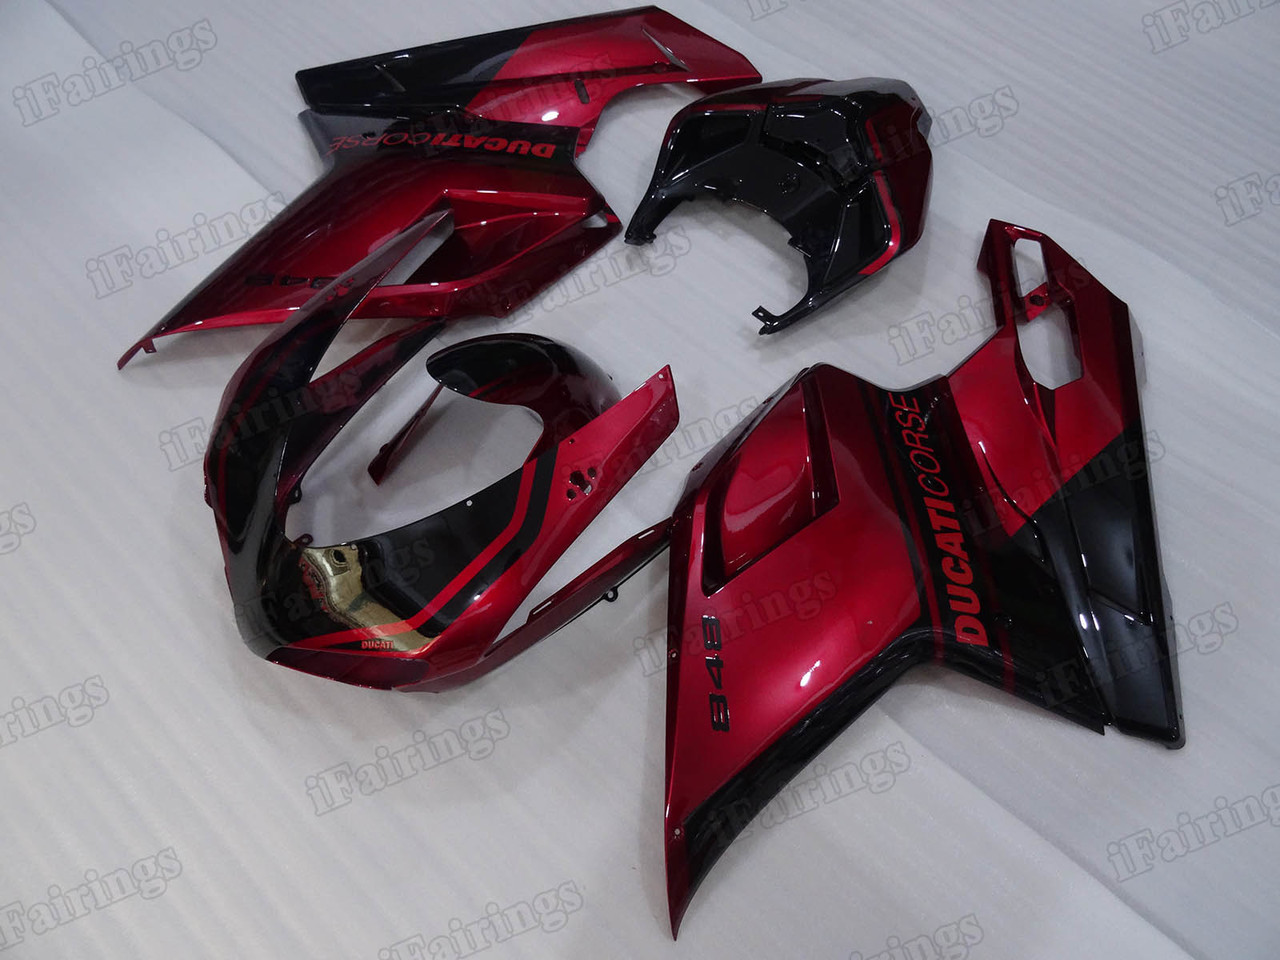 Motorcycle fairings/bodywork for Ducati 848/1098/1198 red and black.